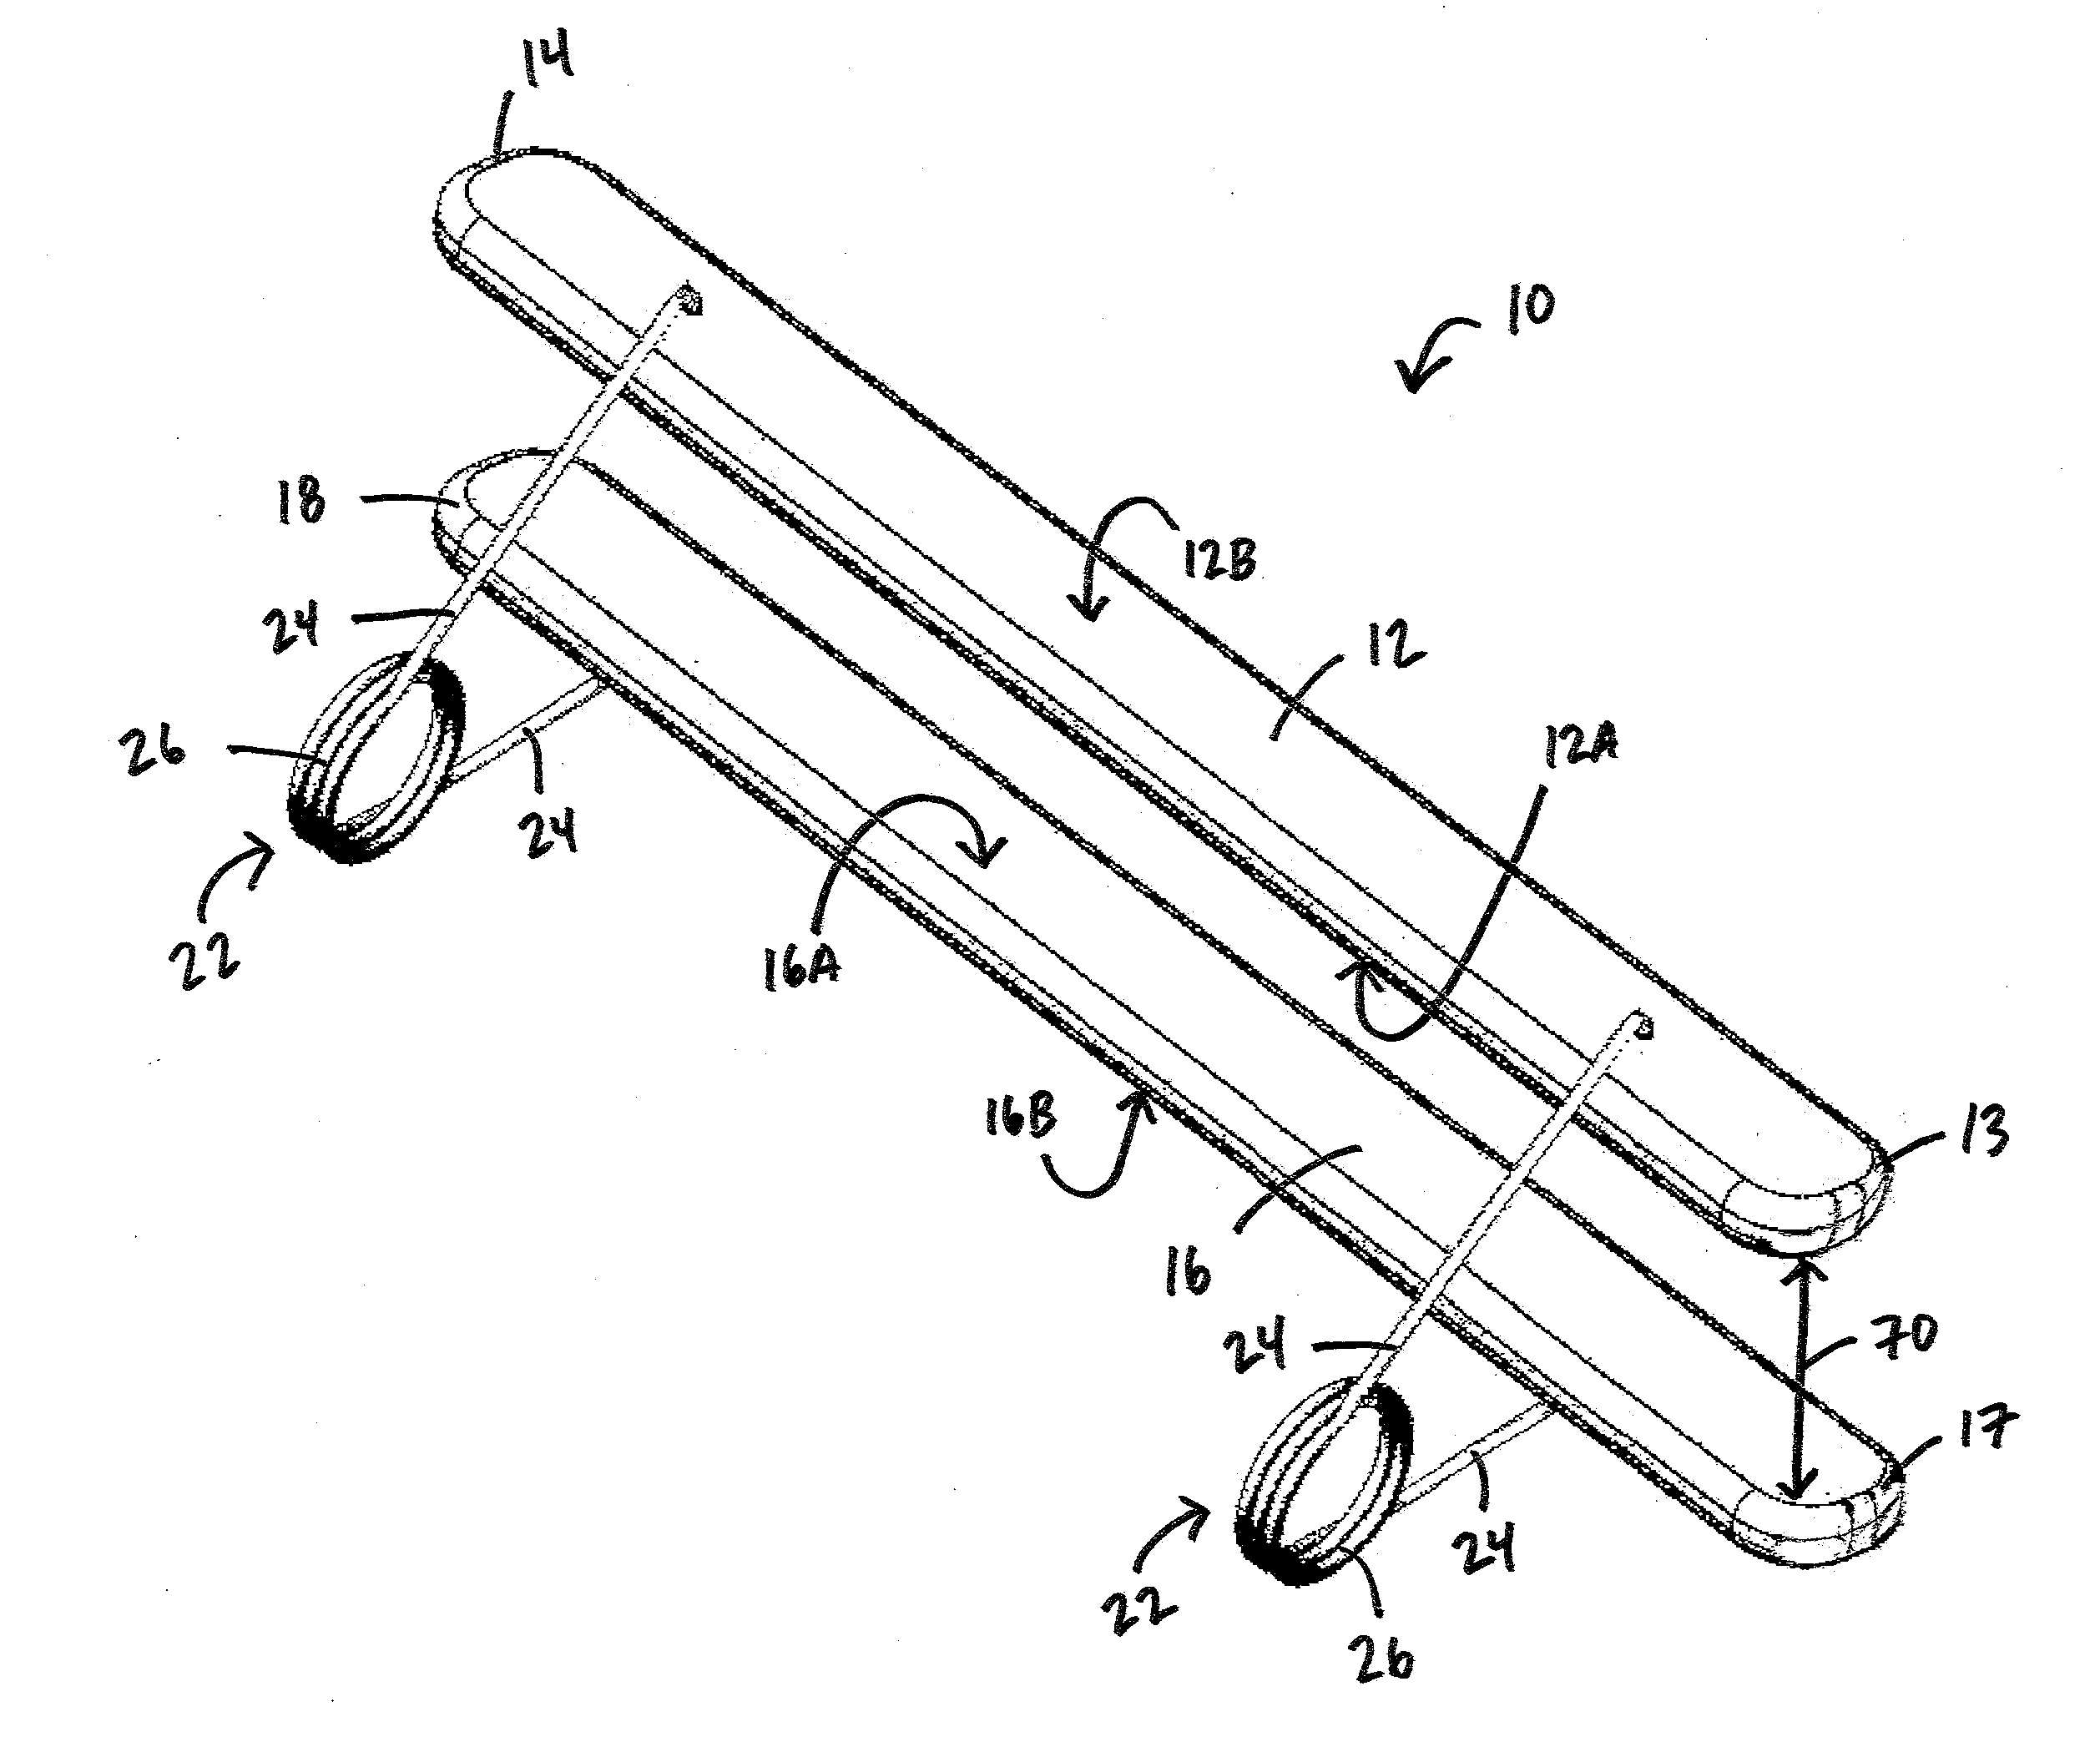 Tissue restoration devices, systems, and methods